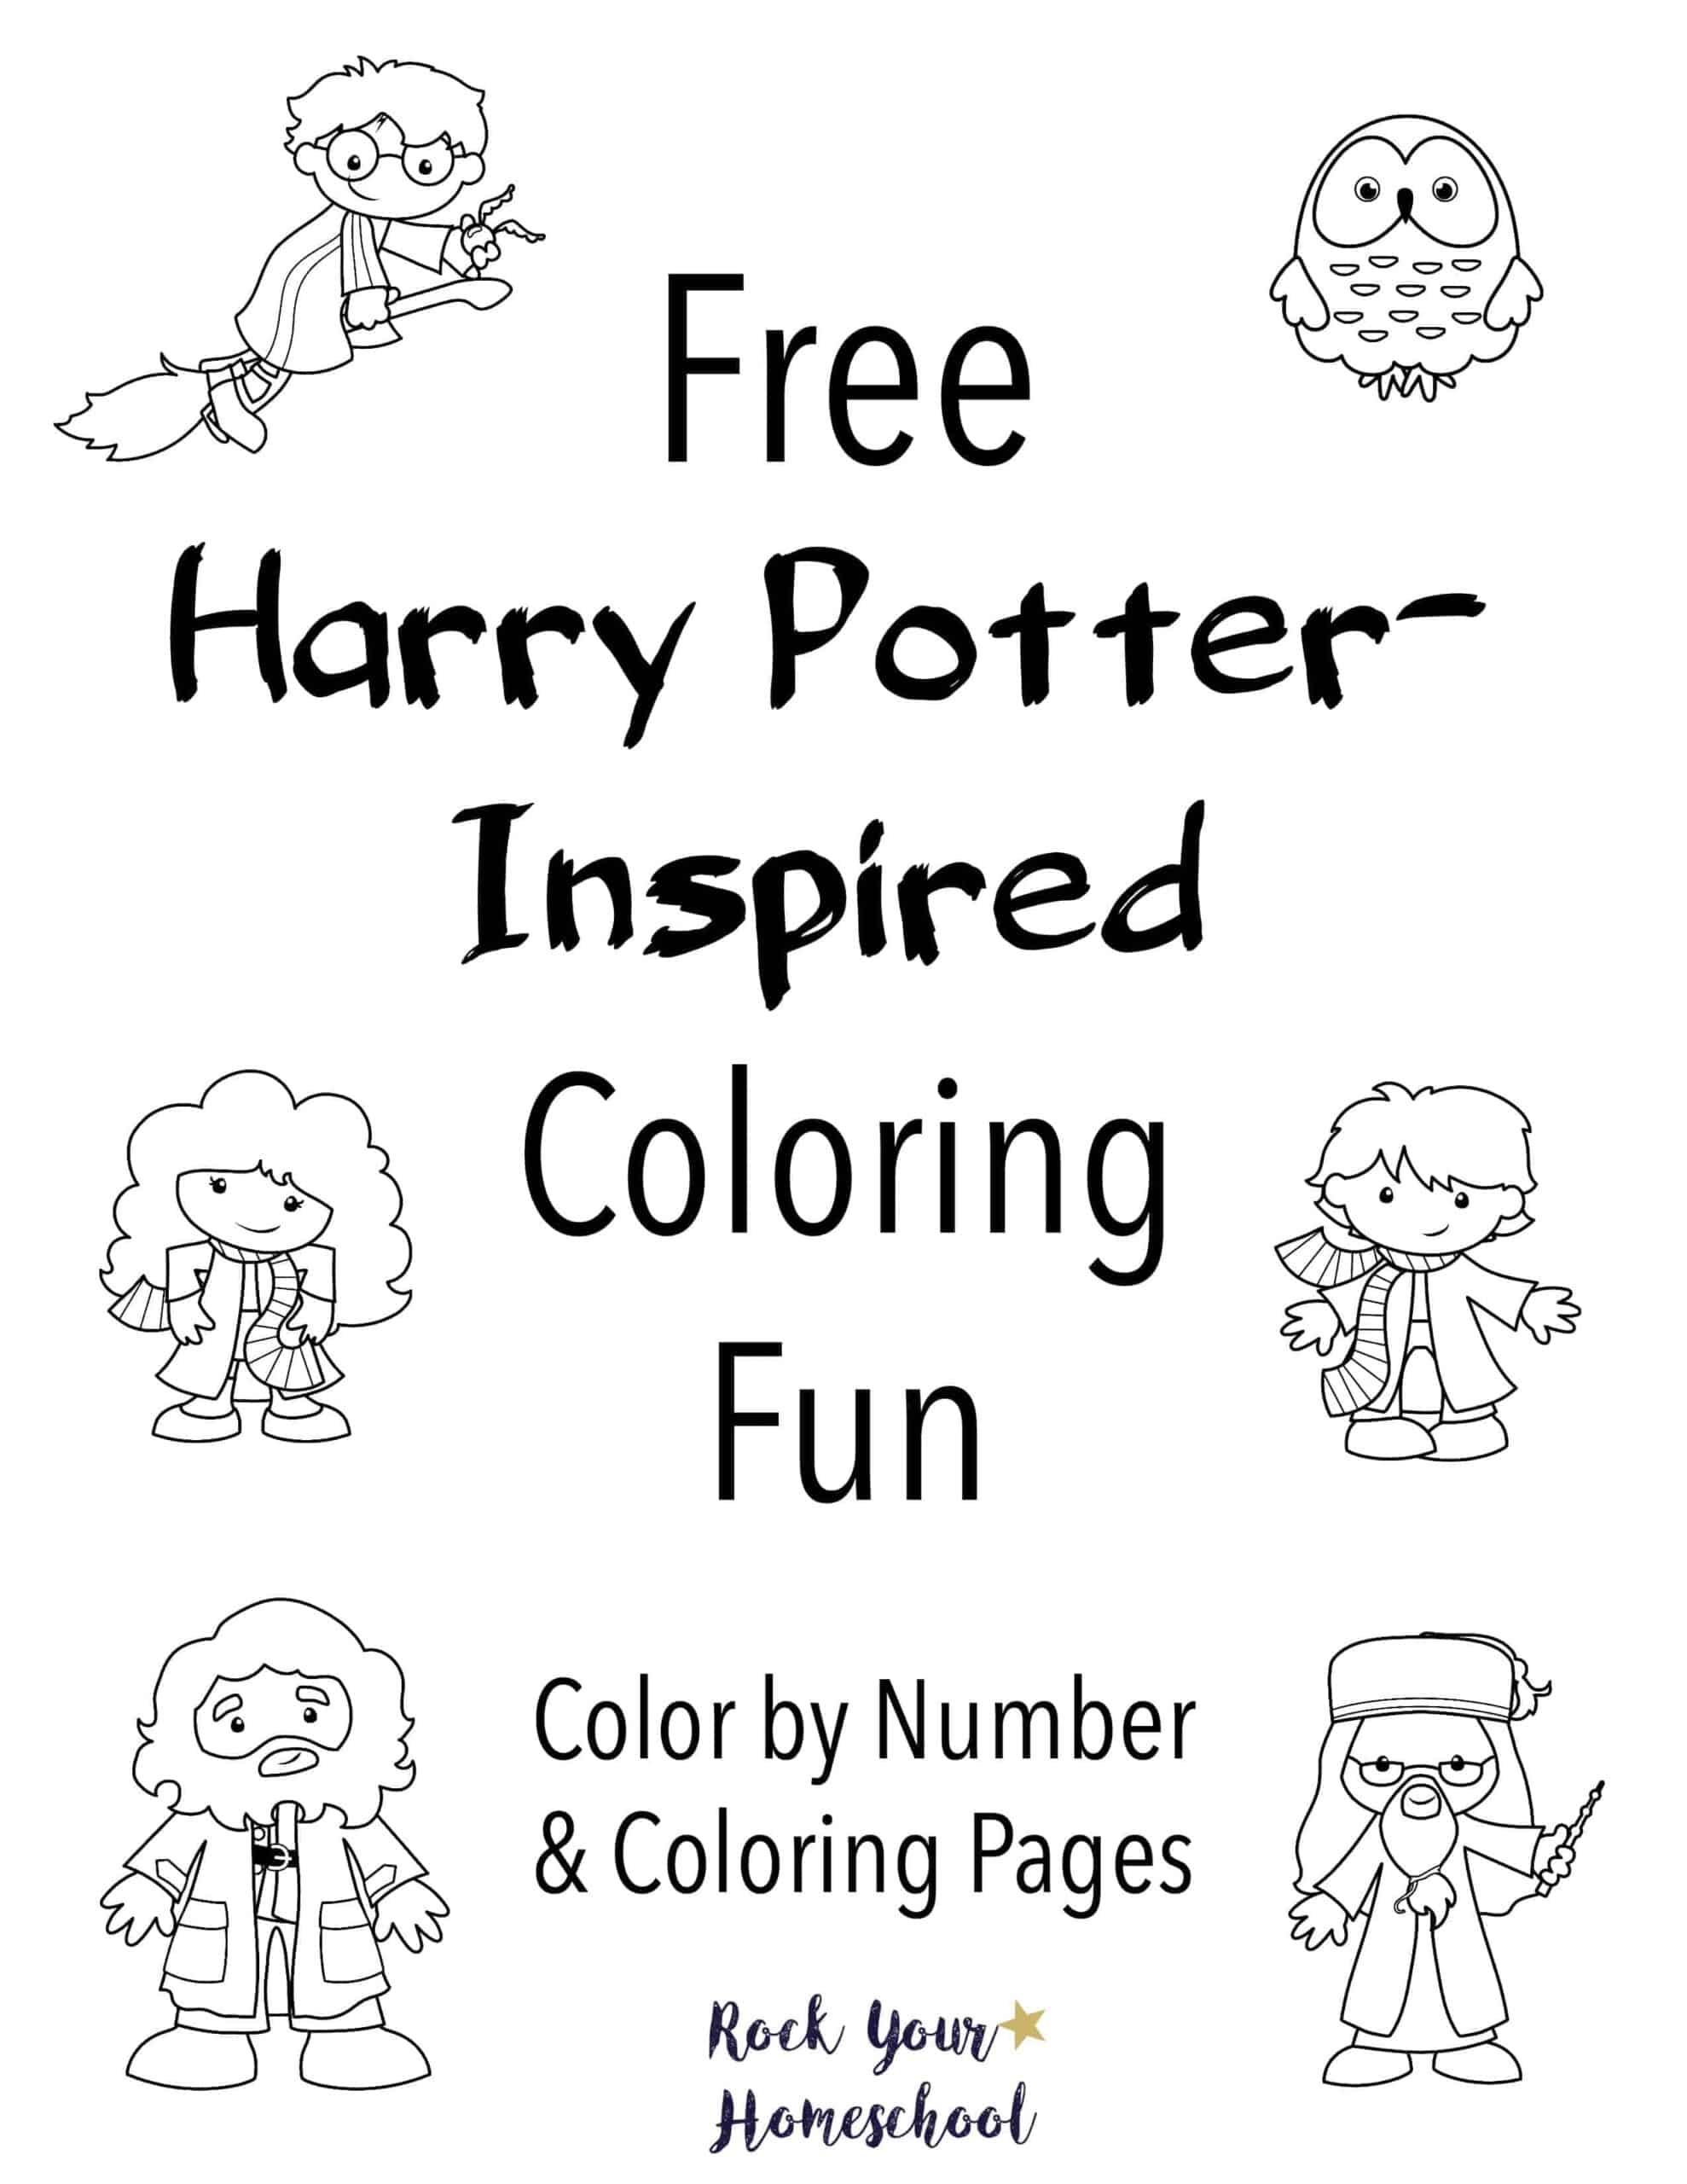 free Harry Potter coloring fun cover